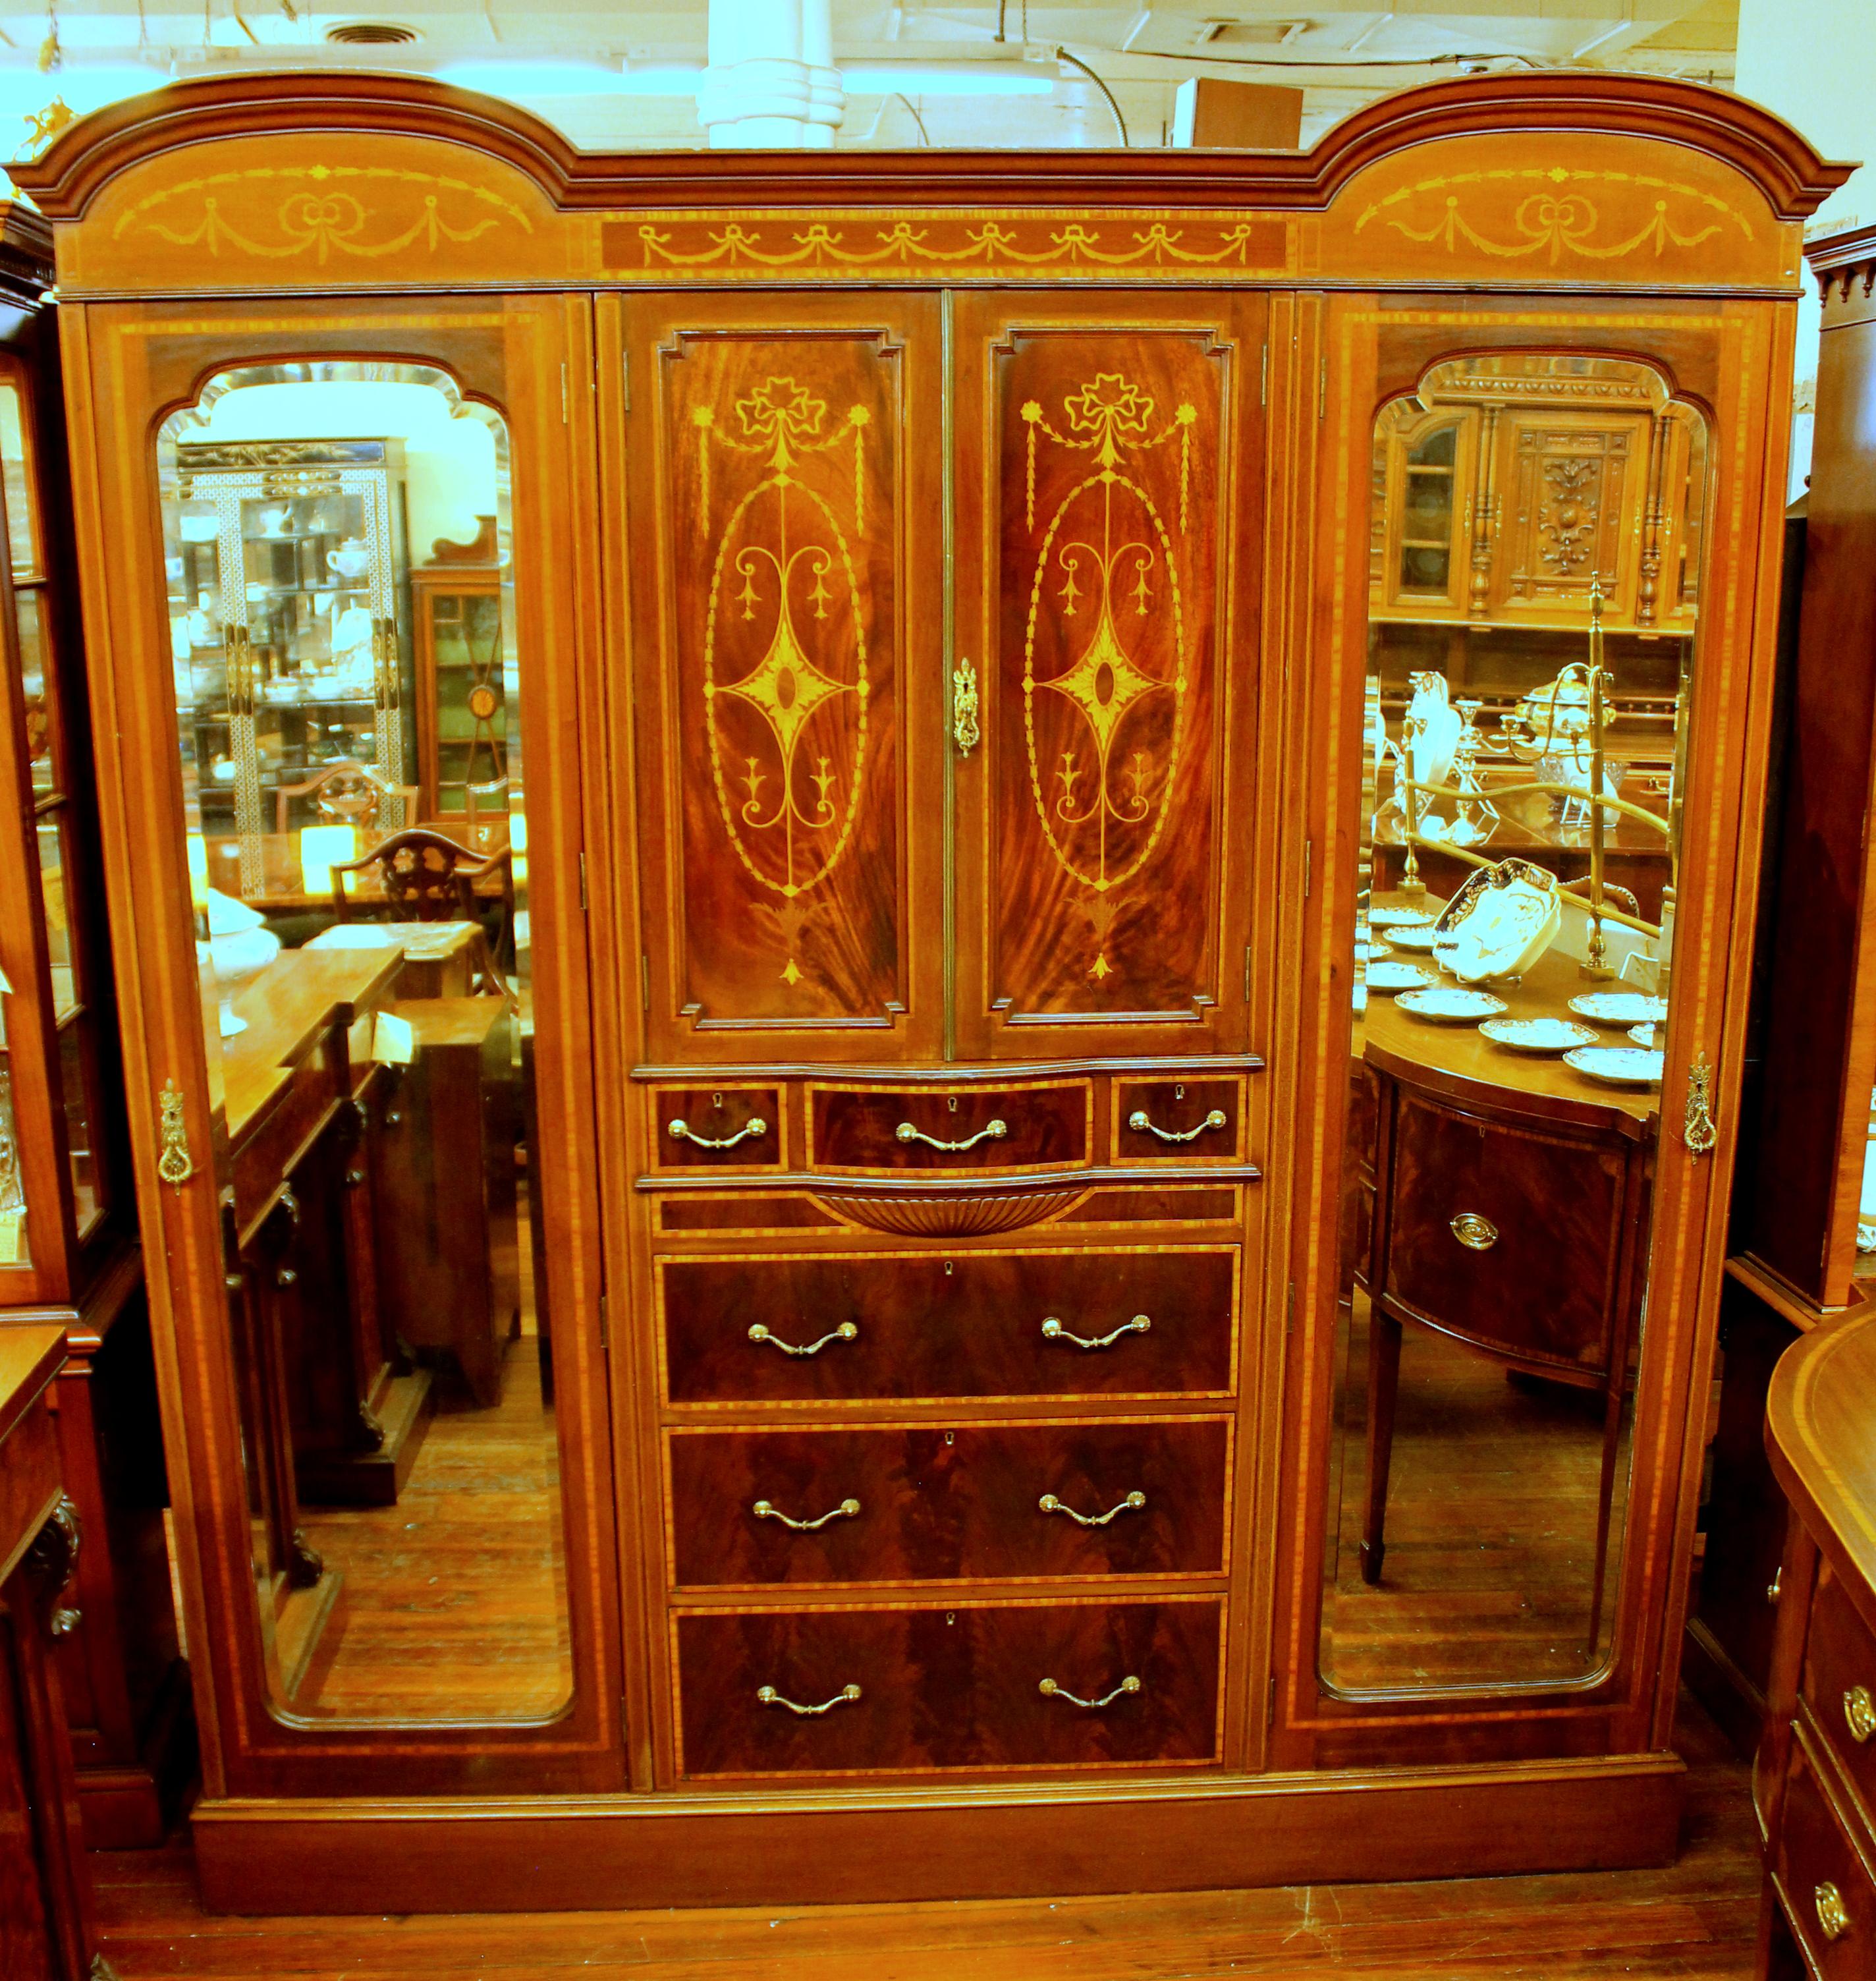 Extraordinary quality antique English marquetry inlaid figured mahogany compactum wardrobe.

Drawers are cedar-lined.

Please note exceptional marquetry inlay and flame mahogany fronts. Disassembles into five easily transportable pieces (top,